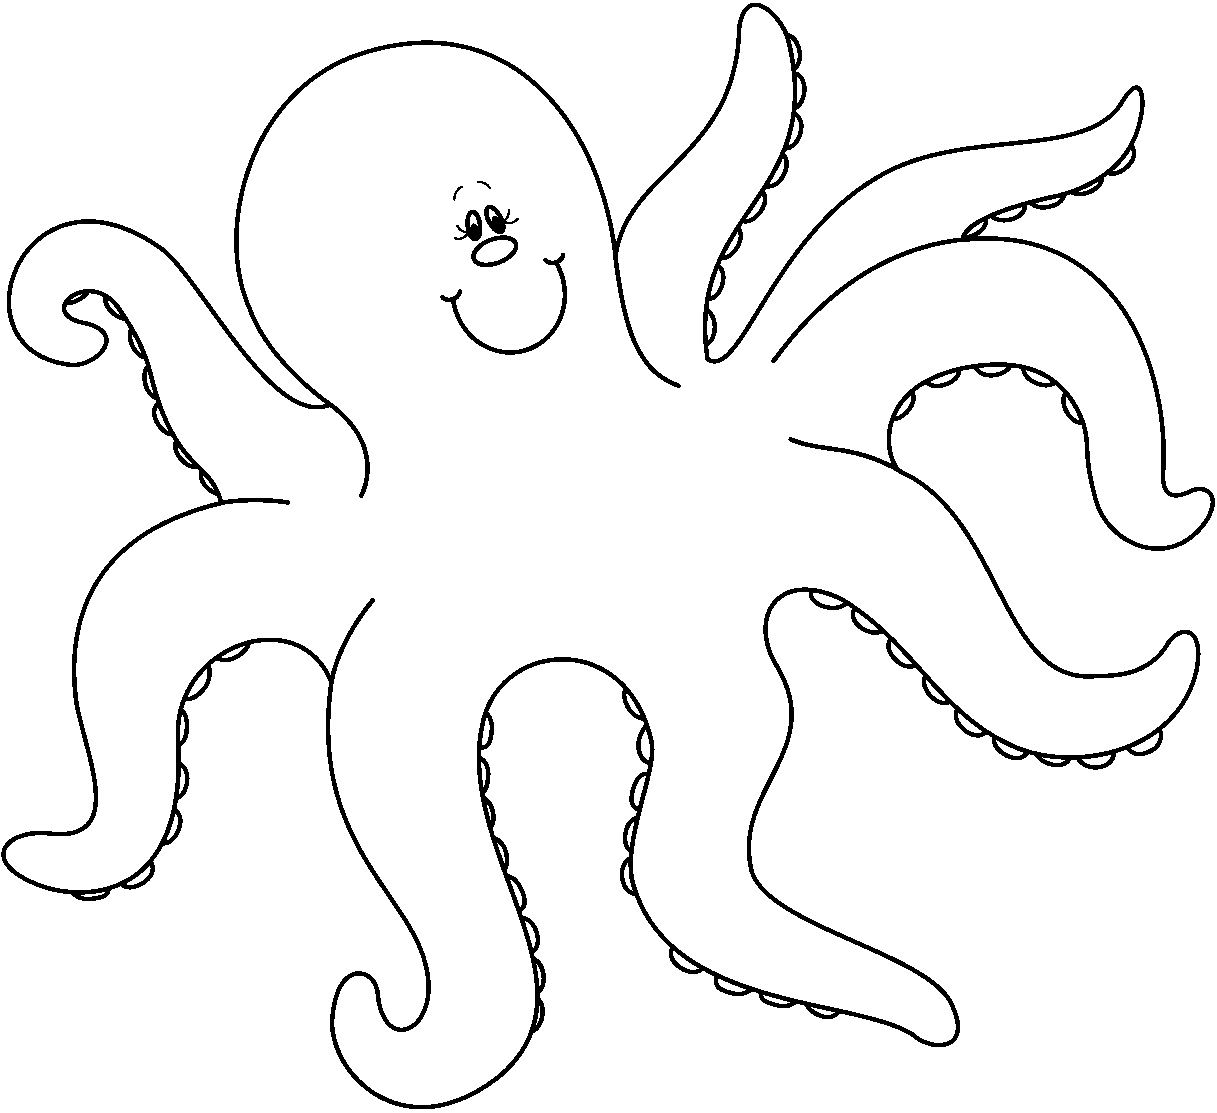 Octopus clipart free clipart image 6